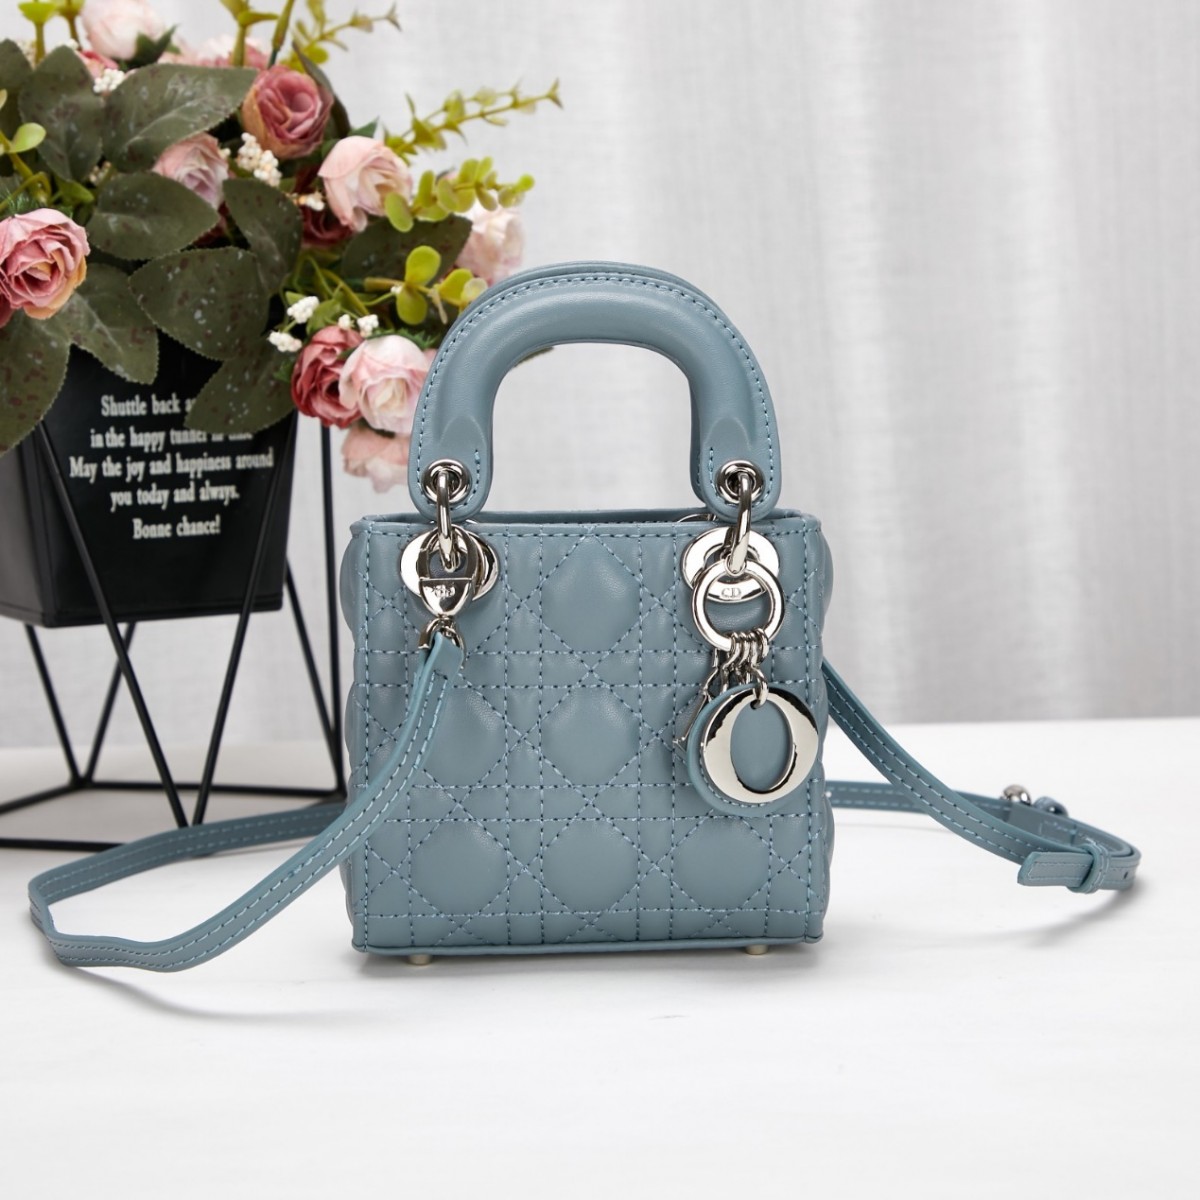 Why is the elegant Lady Dior replica bags so classic？(2022 updated)-Best Quality Fake Louis Vuitton Bag Online Store, Replica designer bag ru